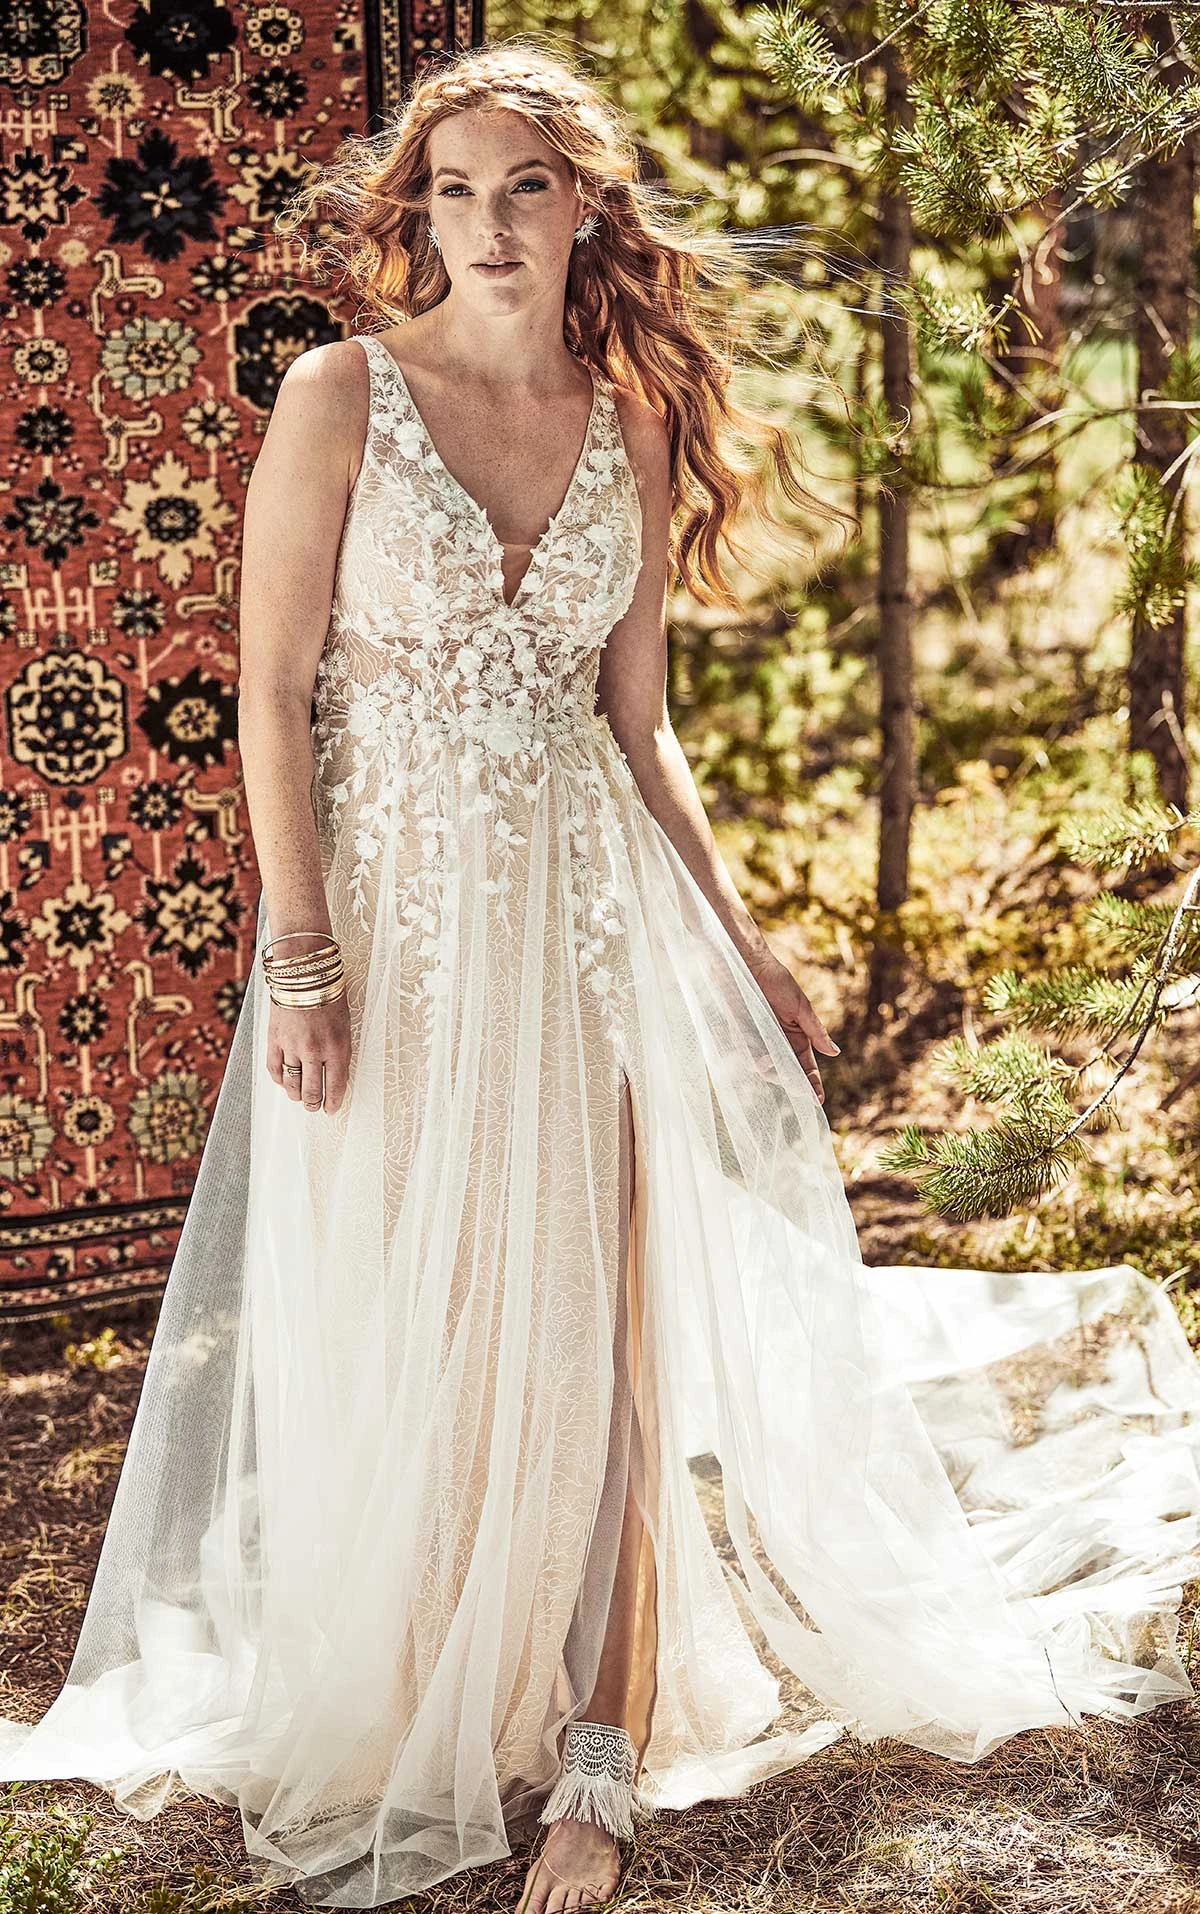 gypsy style wedding dresses for sale